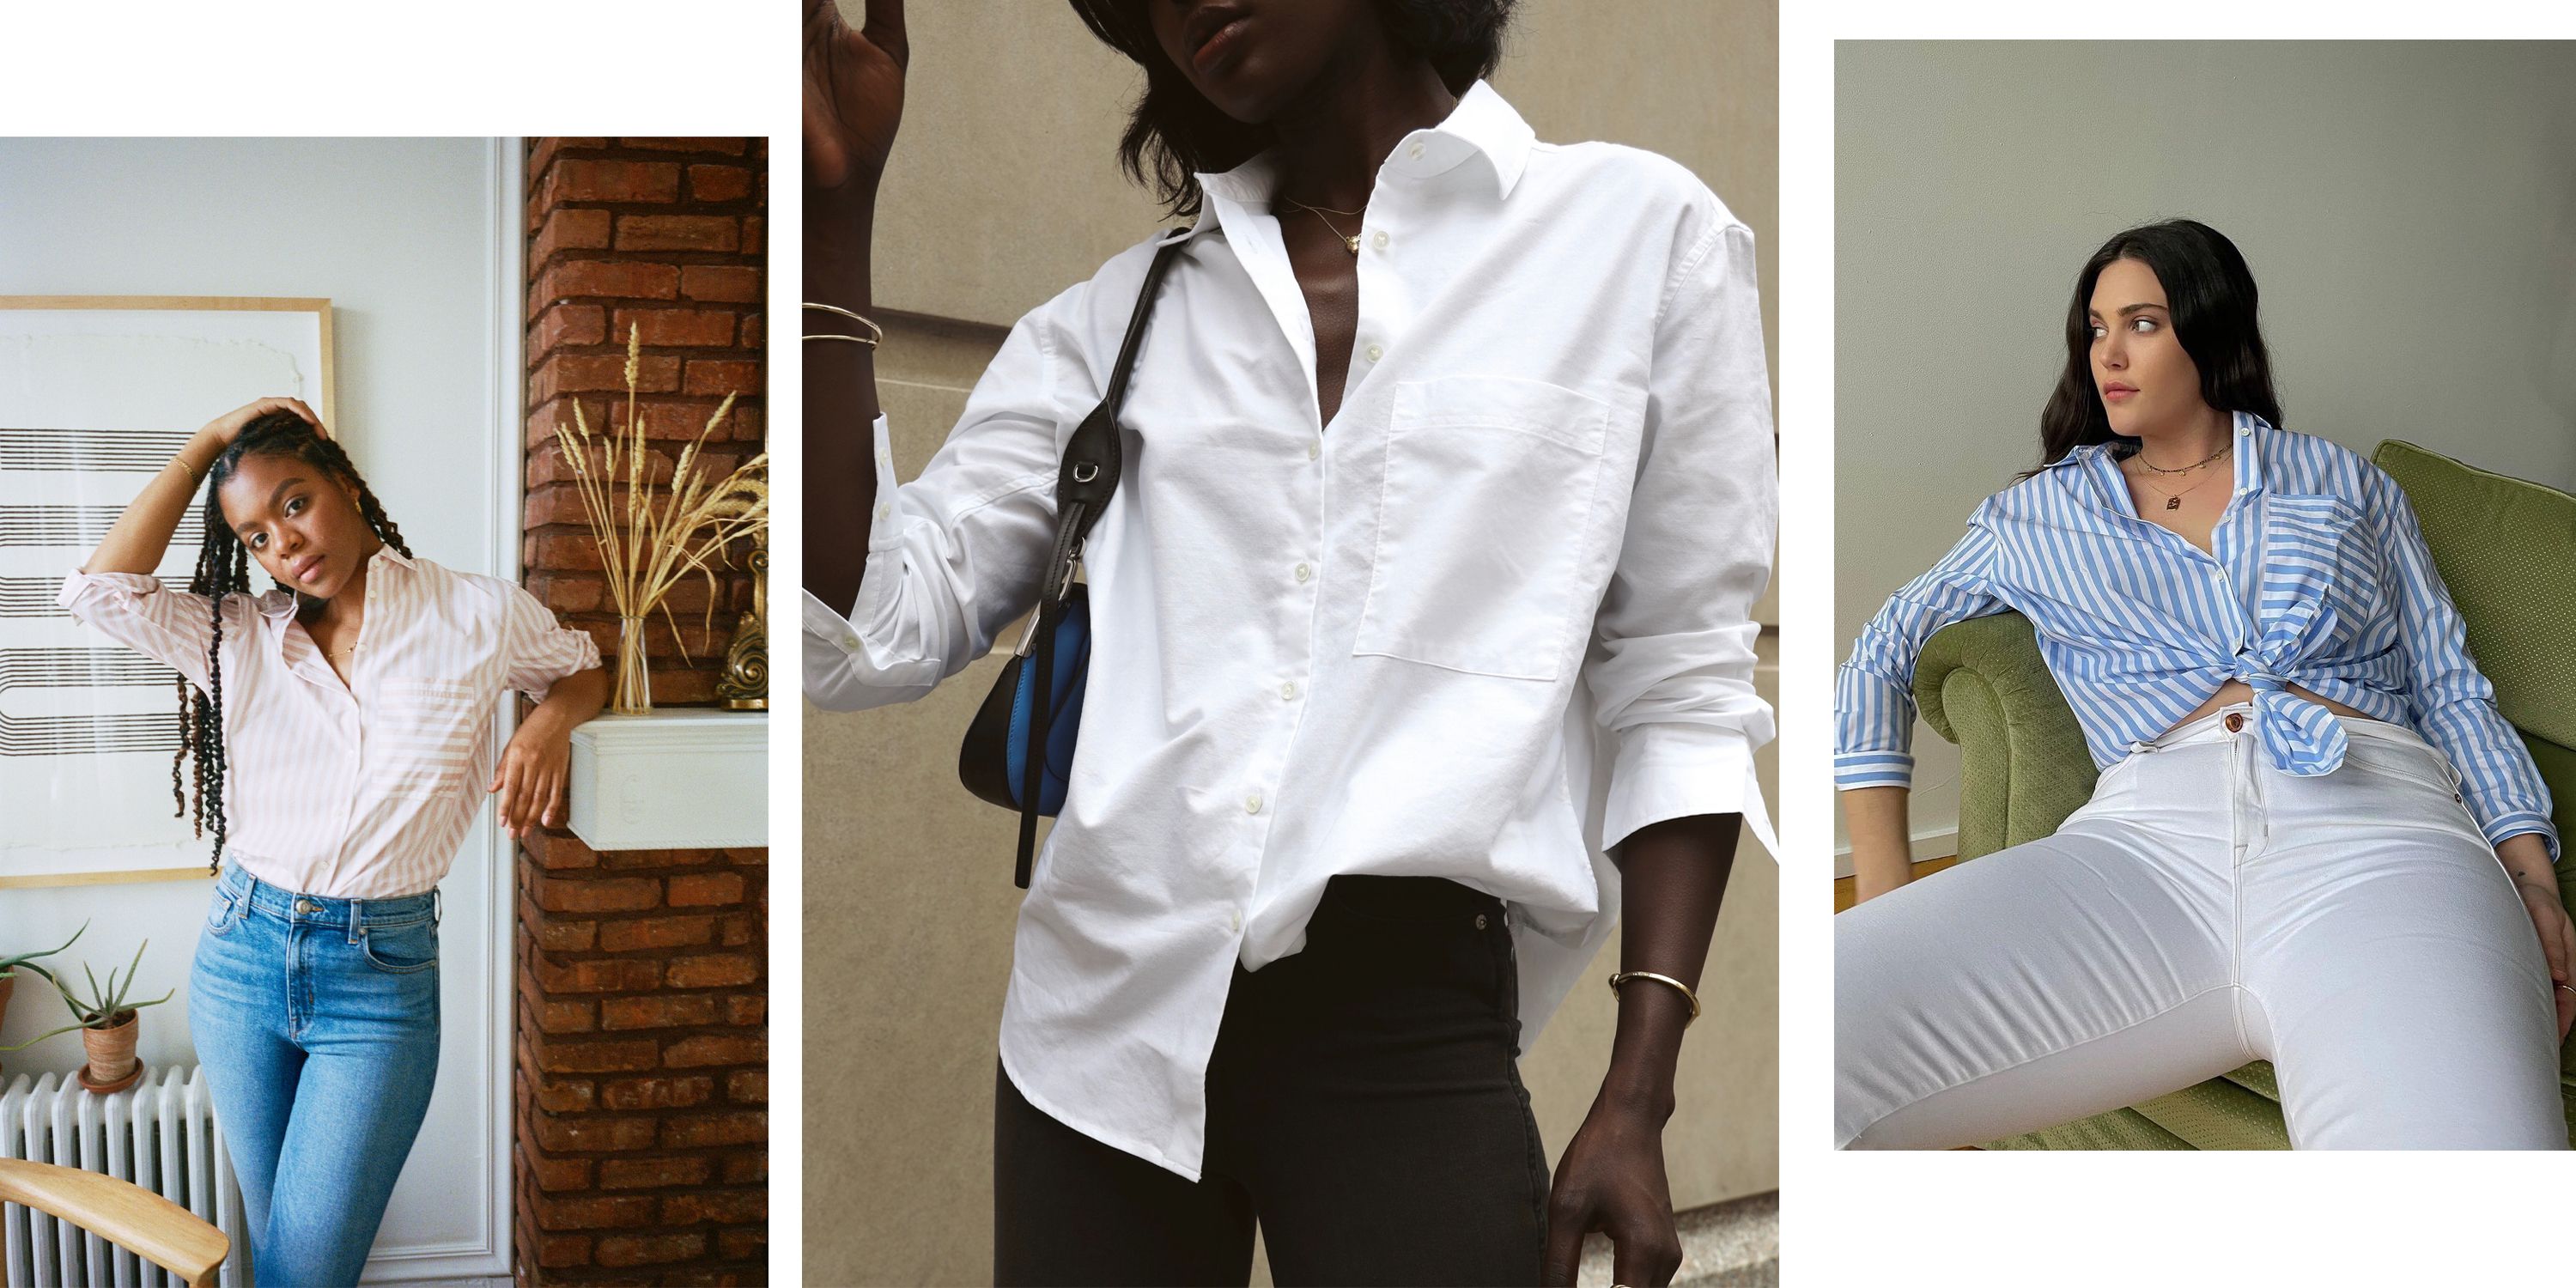 Models, Editors, and Even Oprah Love This Button-Down Shirt